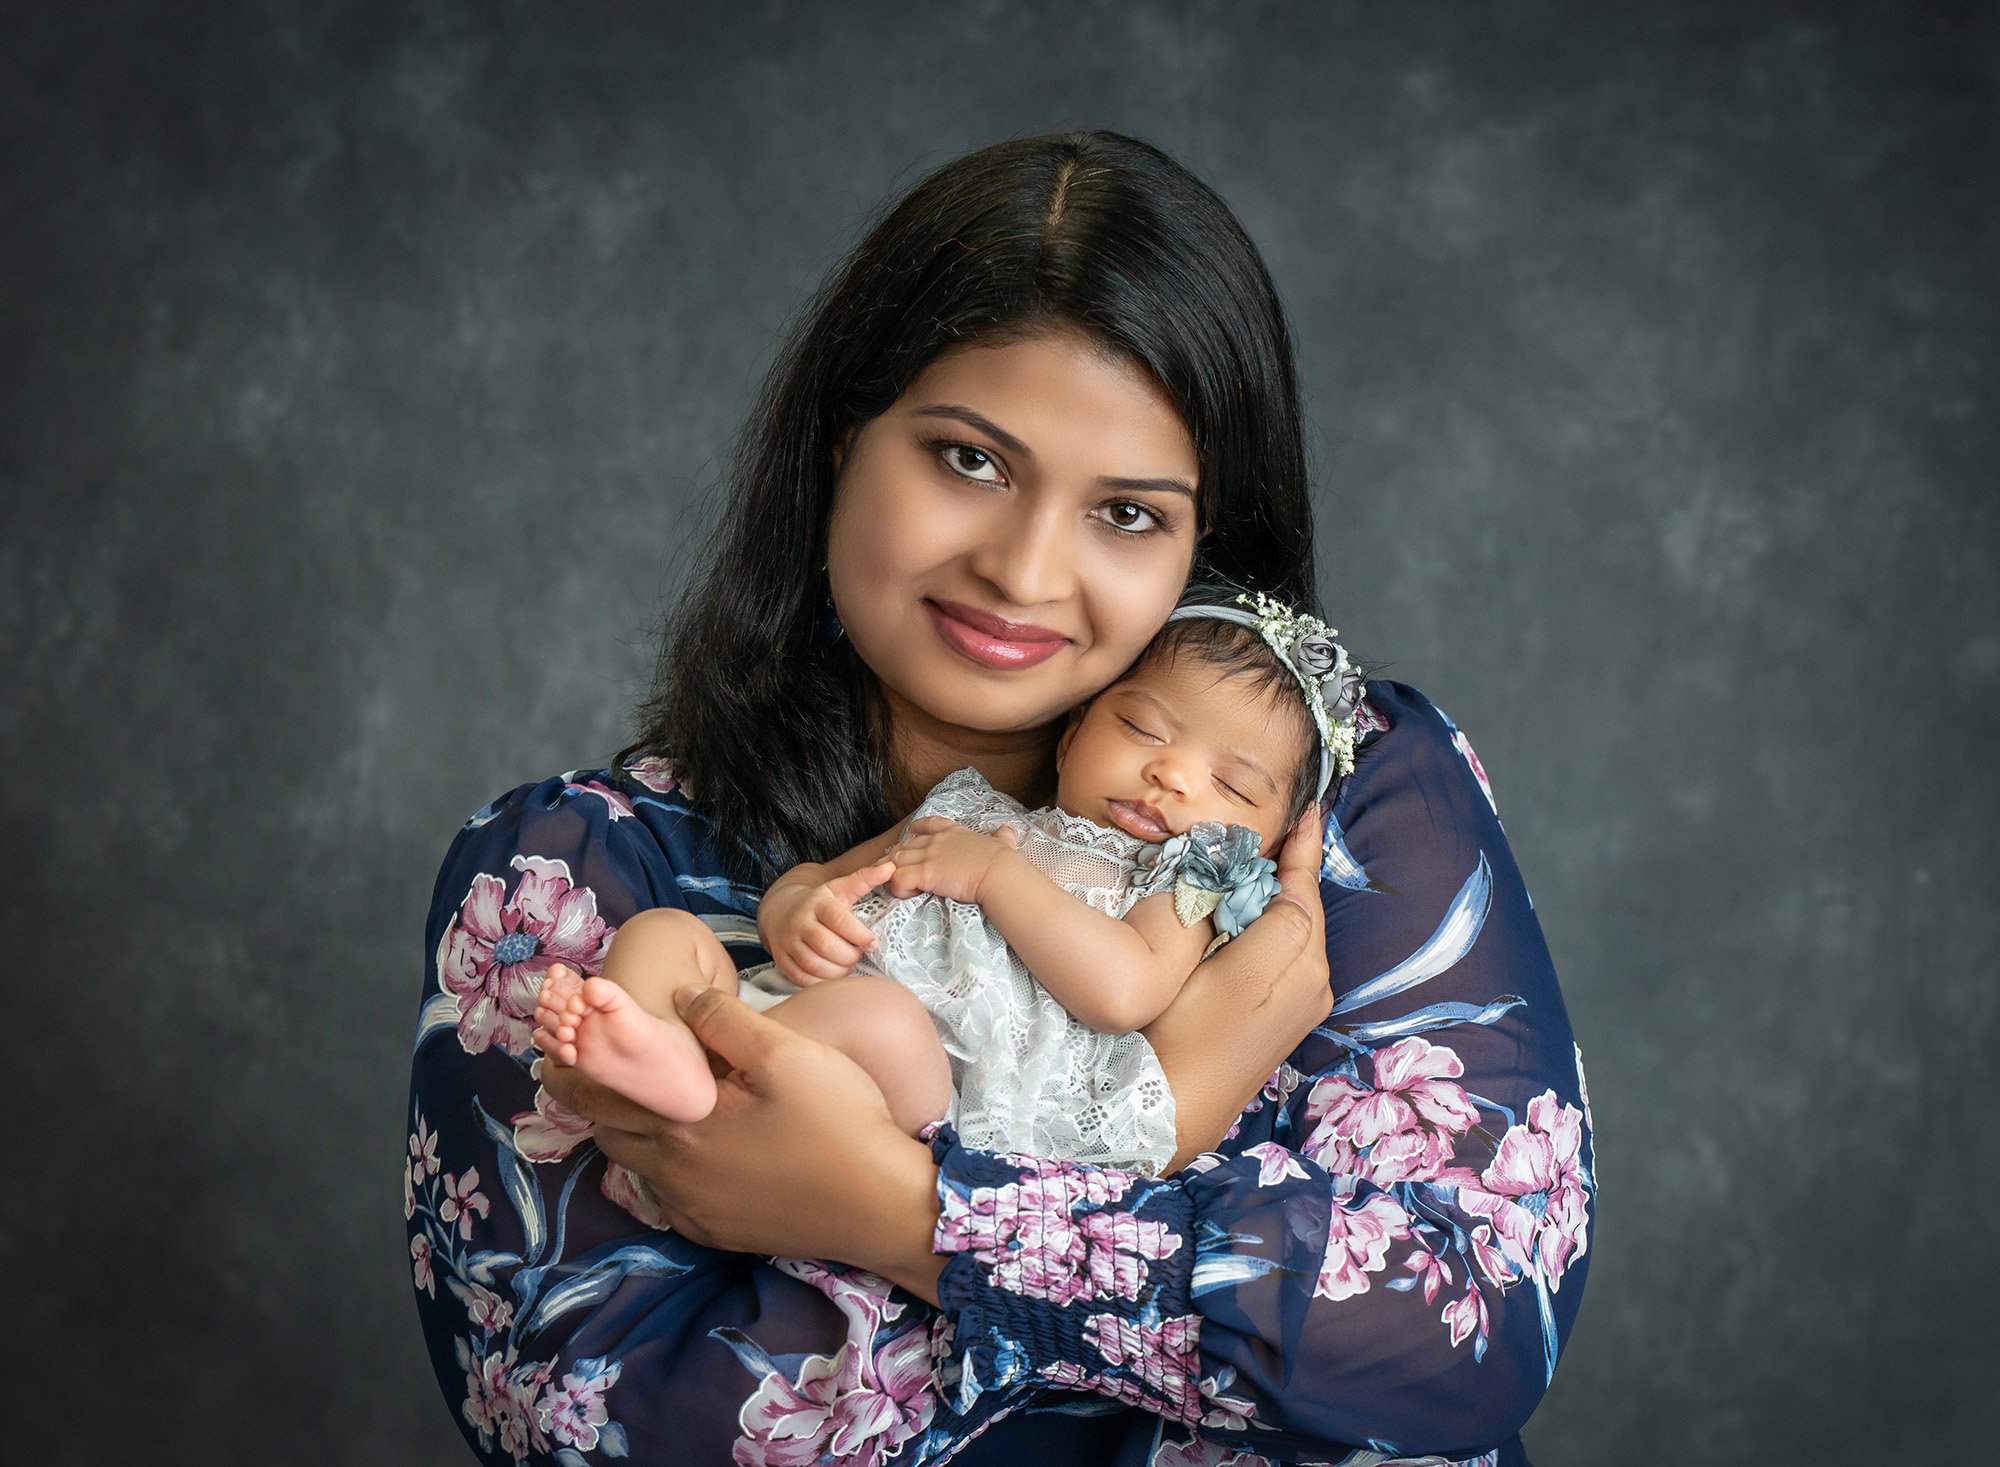 new mom cradling newborn baby girl in grey floral dress close to her chest